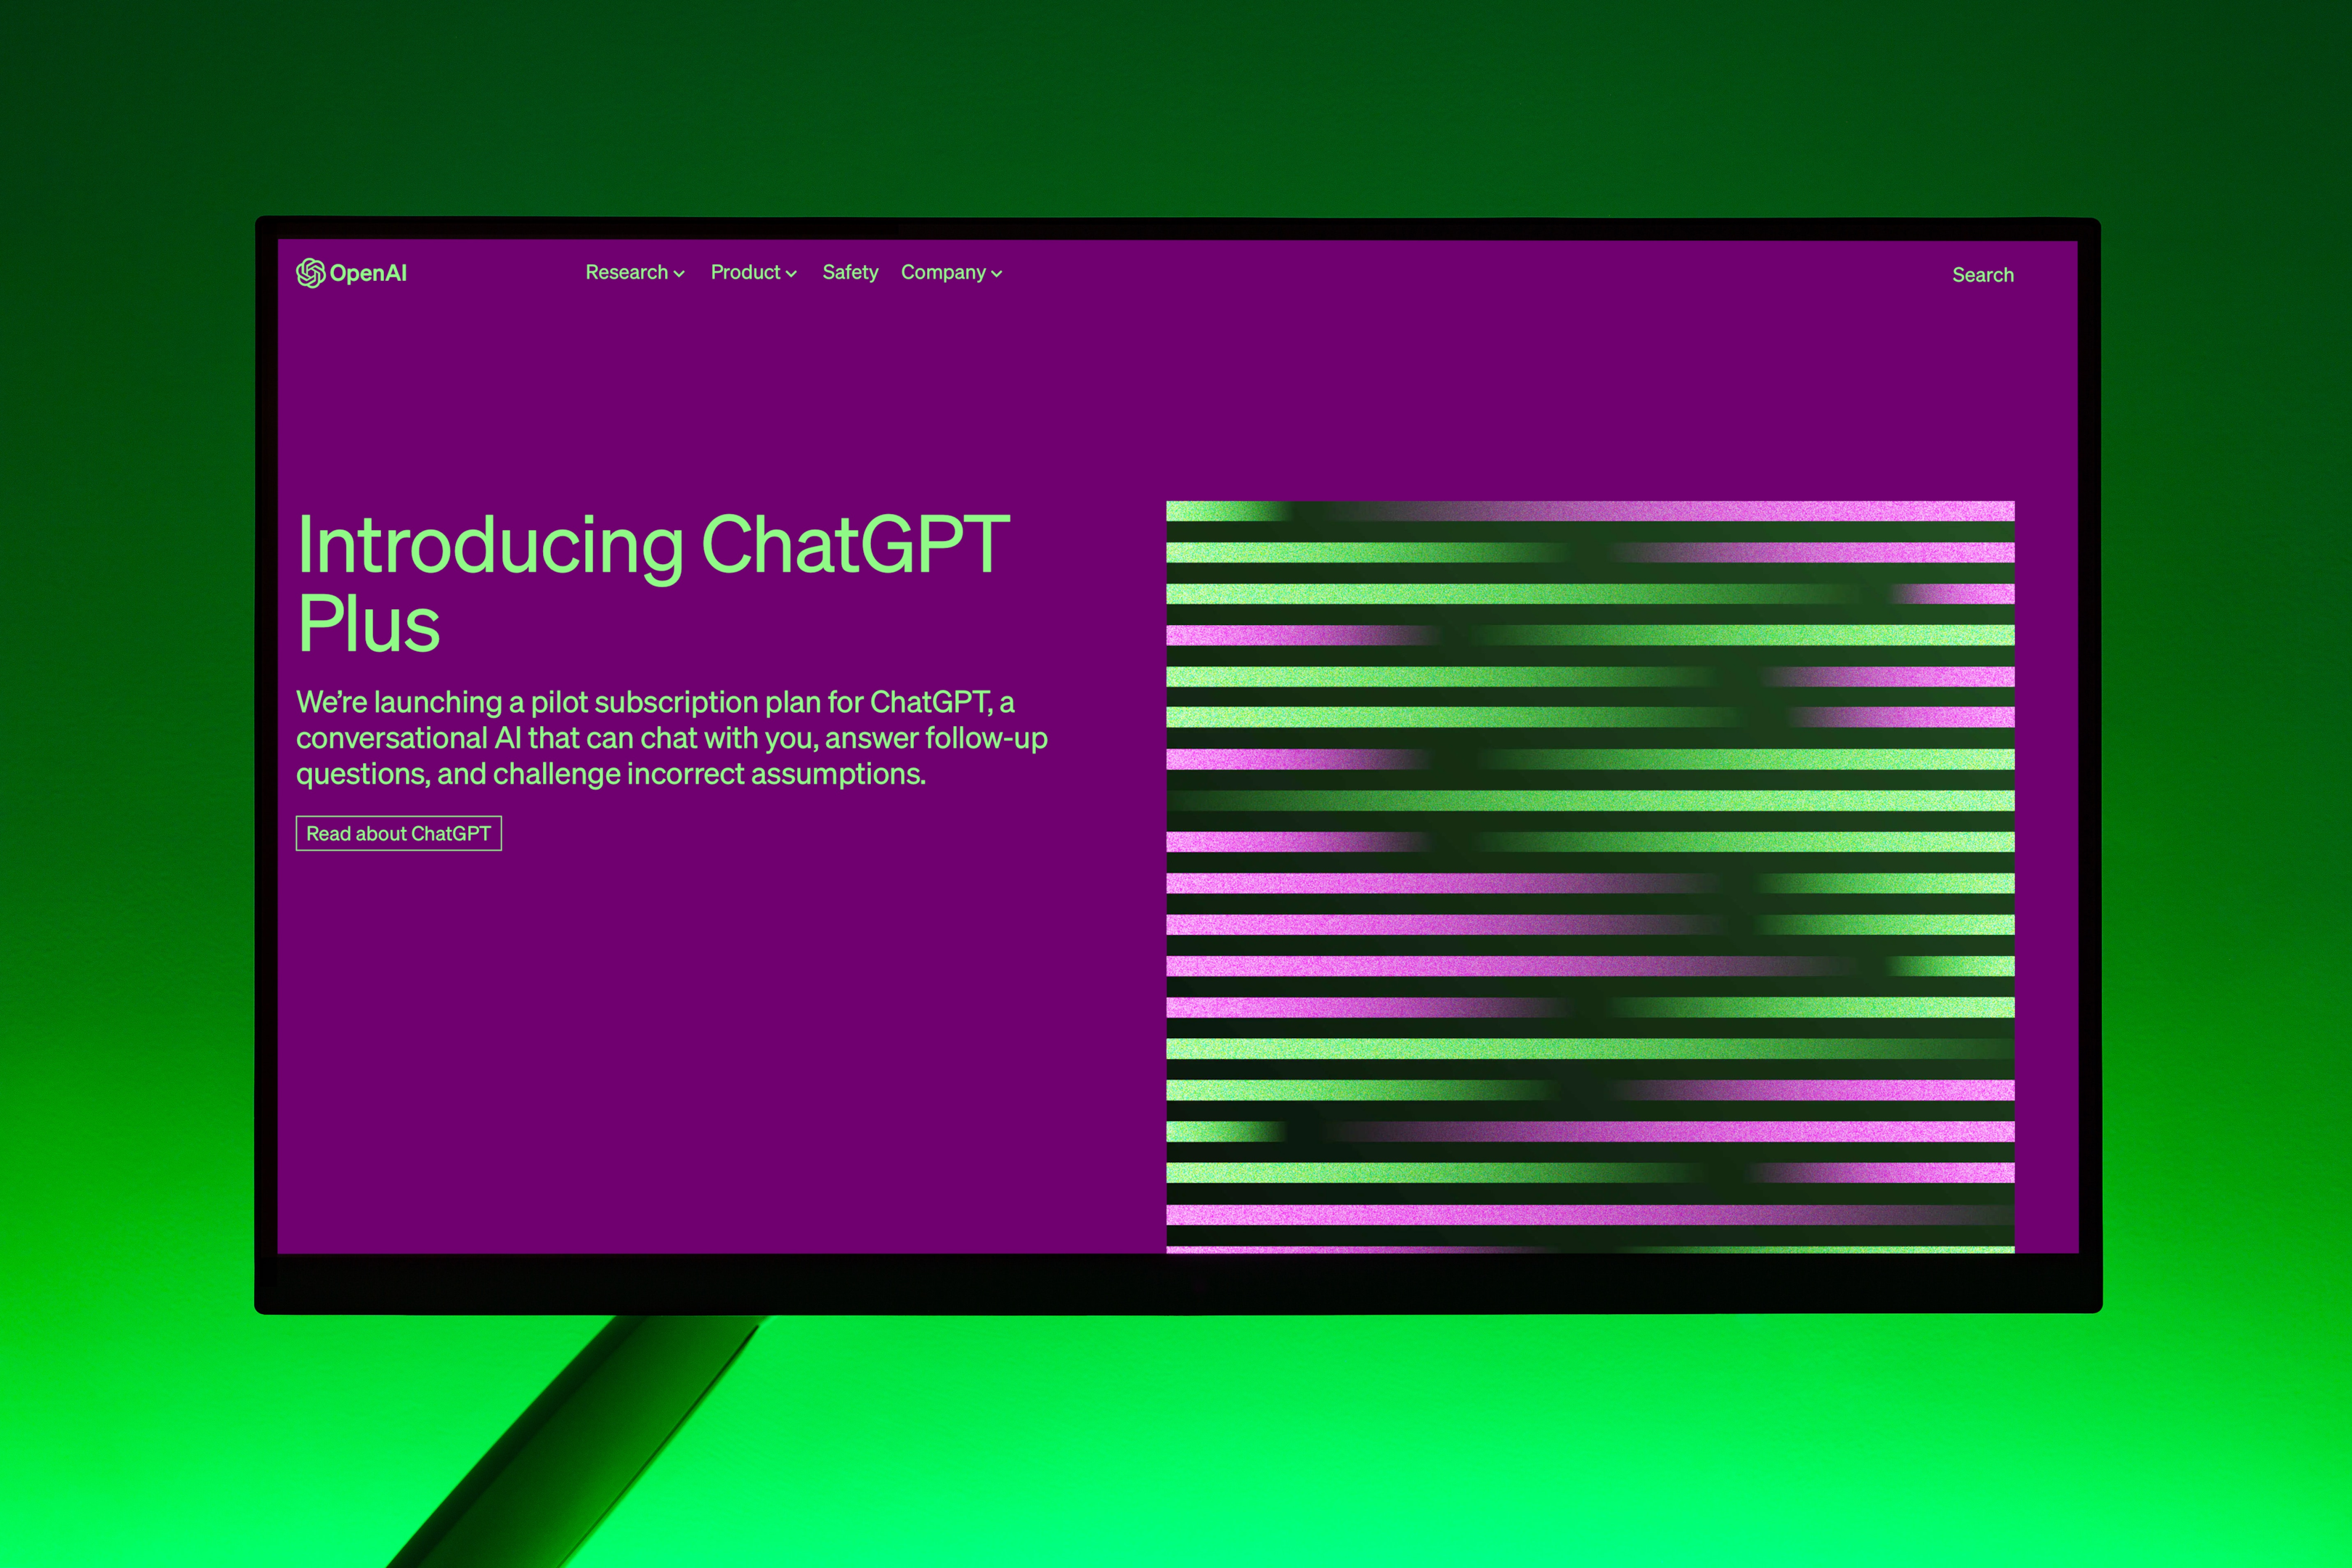 Introduction to ChatGPT Plus page